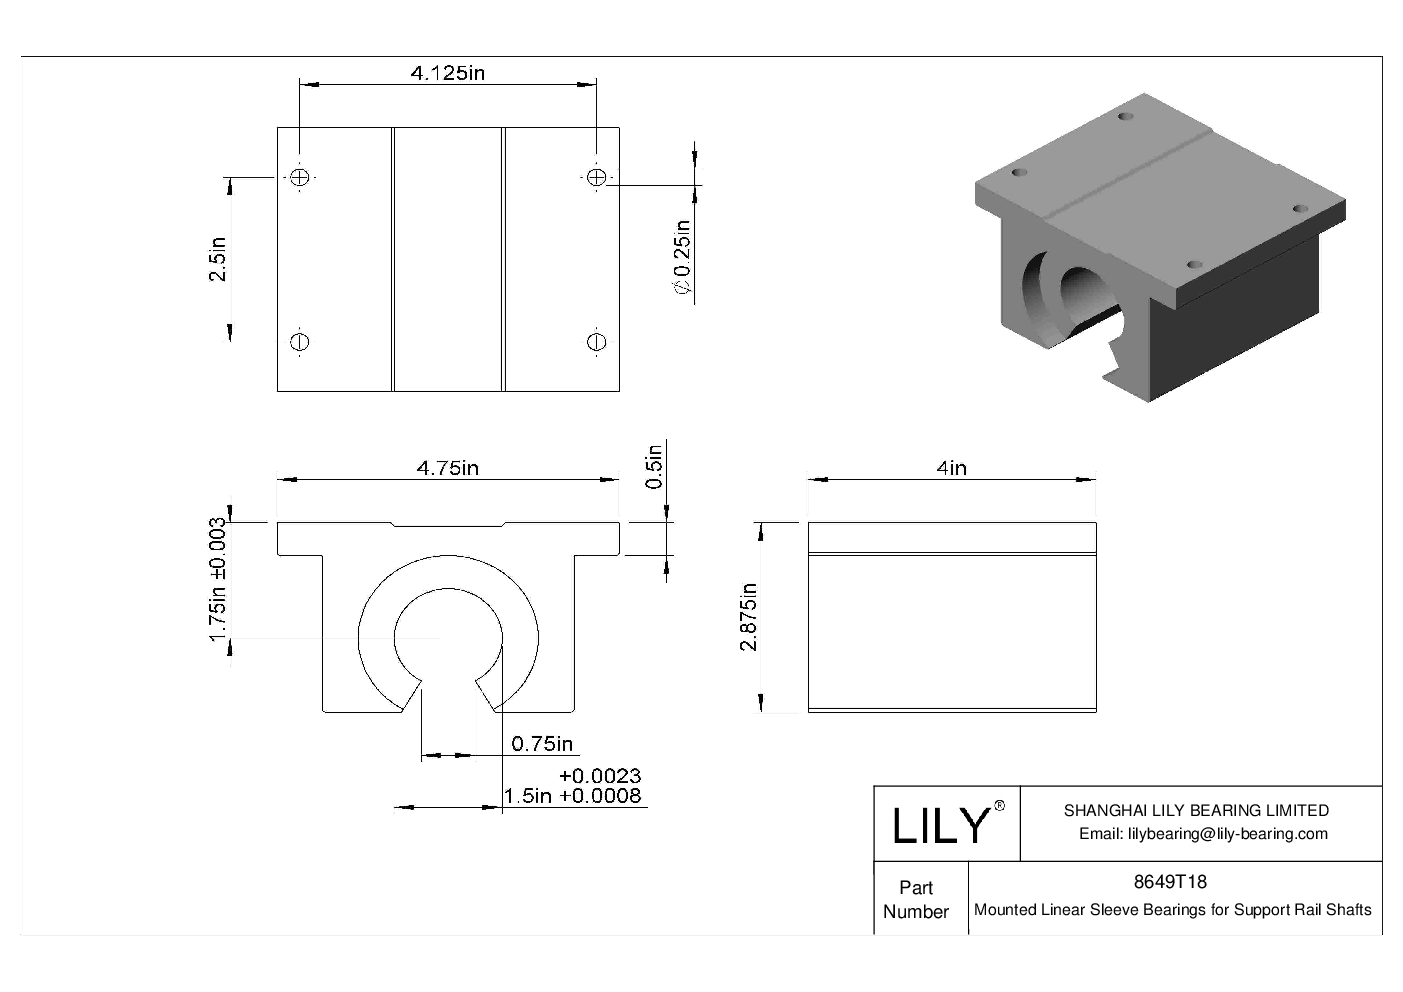 IGEJTBI Common Mounted Linear Sleeve Bearings for Support Rail Shafts cad drawing